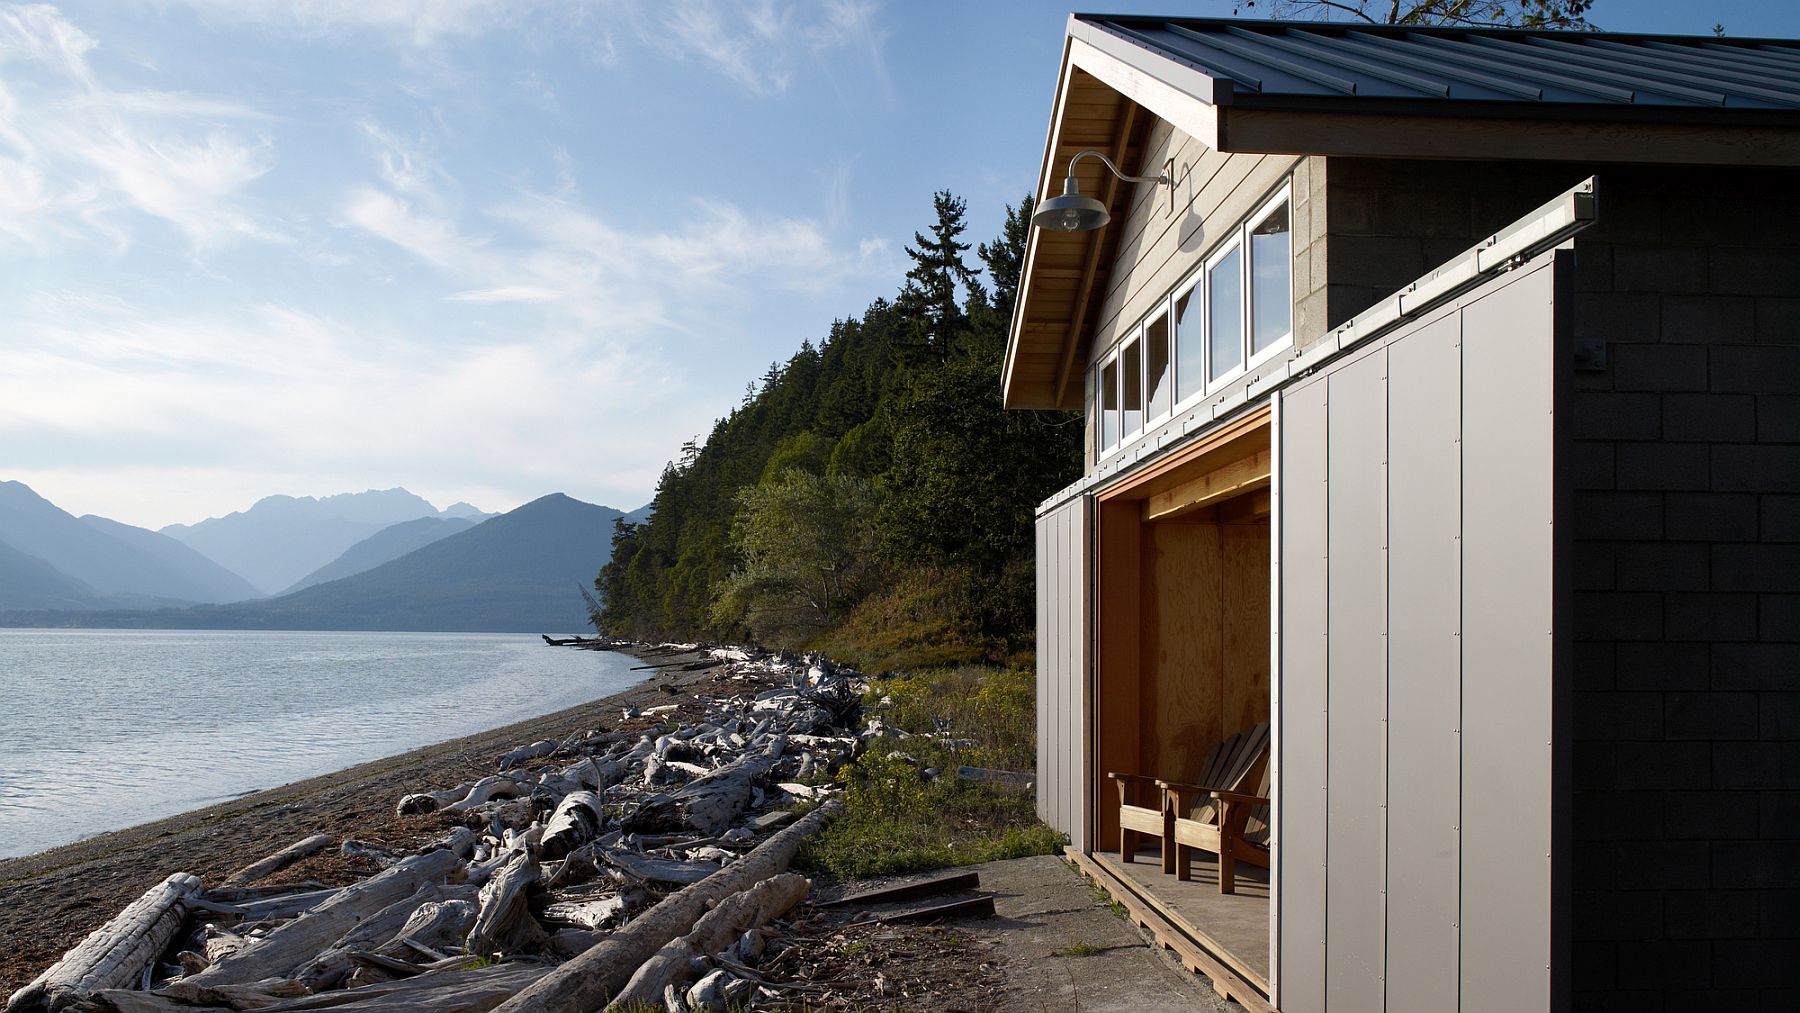 Exquisite-views-and-amazing-landscape-at-the-Hood-Canal-Boat-House